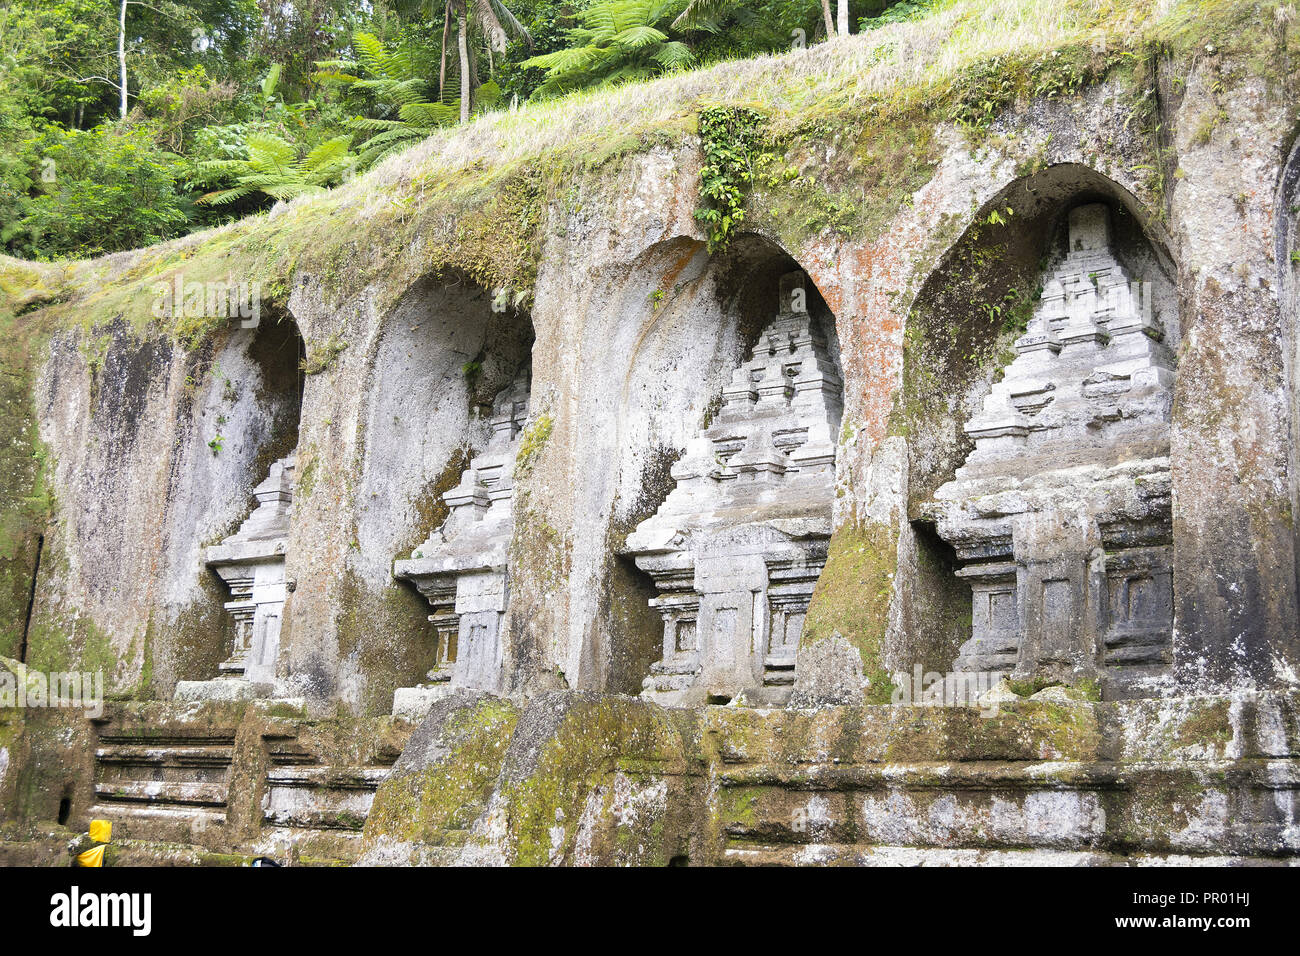 Gunung Kawi 8m high scupltures carved into the rock face resting place of King Anak Wungsu, Bali, Indonesia. Stock Photo